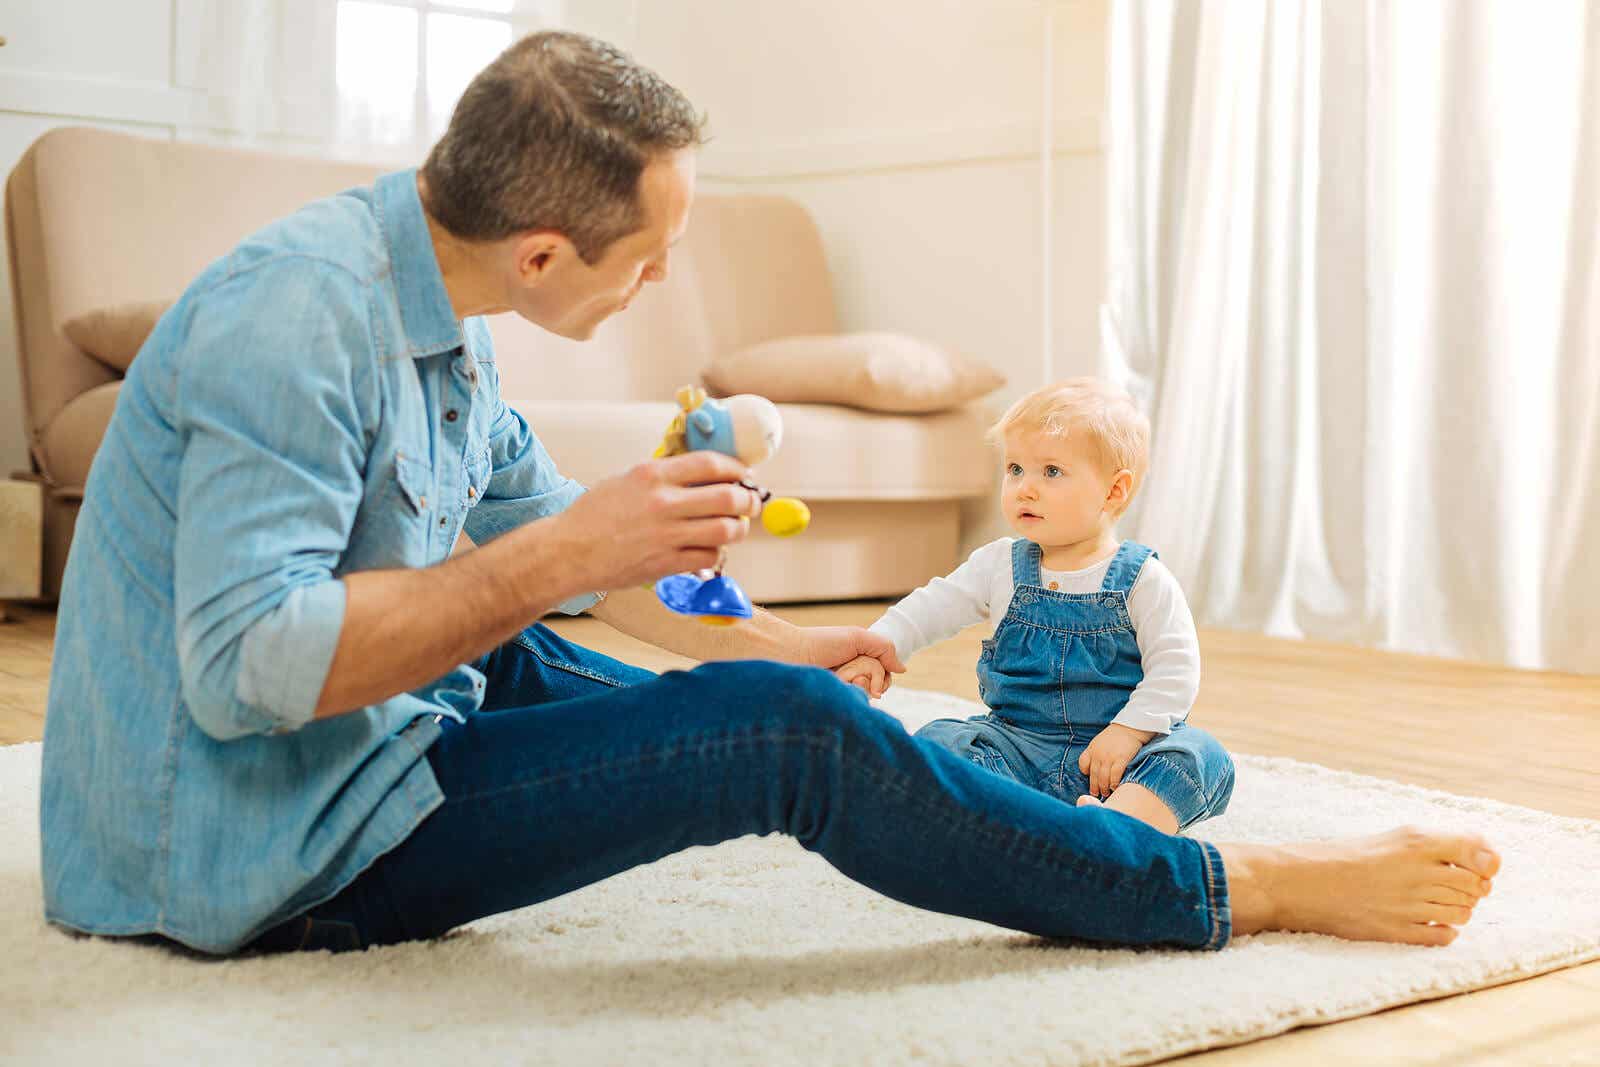 A father sitting on the floor and communicating with his baby girl.